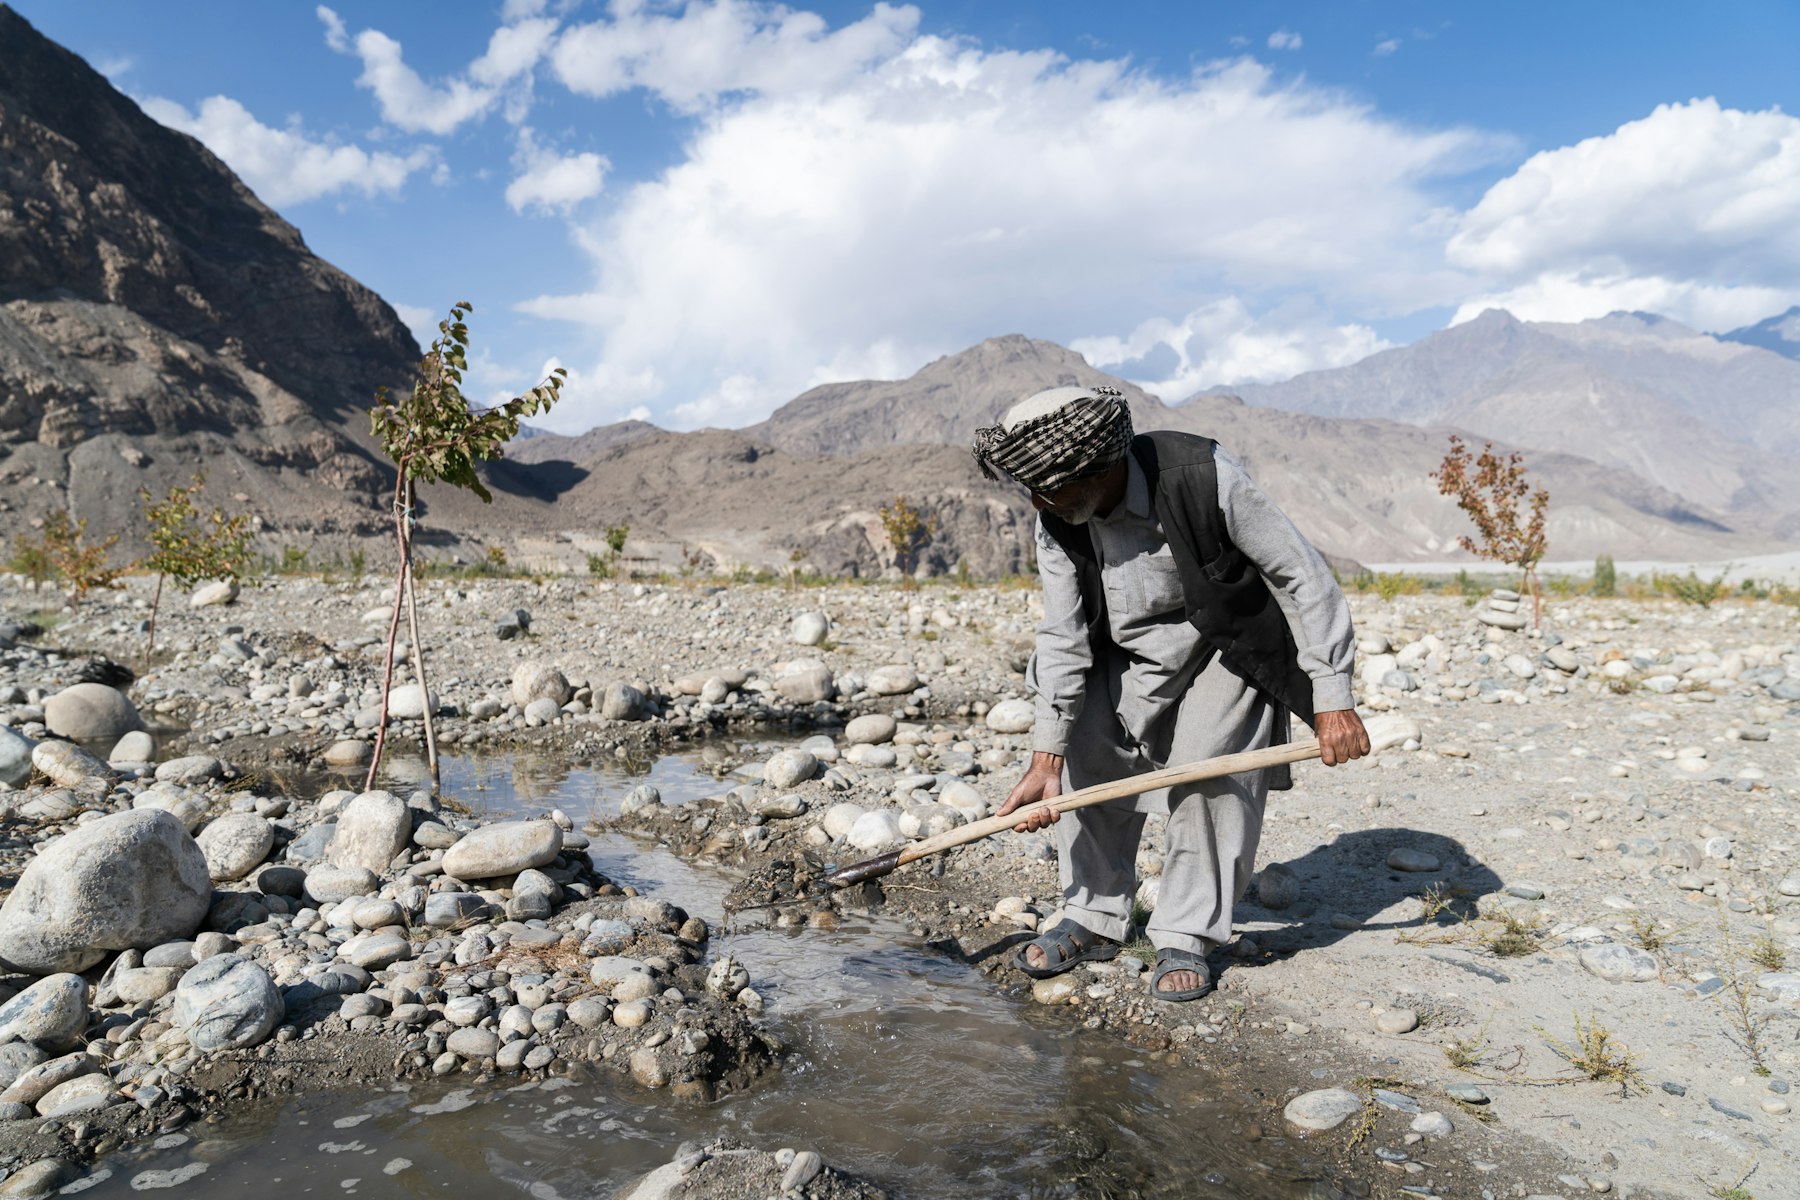 A farmer in Skardu, Pakistan irrigating his land to grow fruit trees. Photo credit: AKF / Christopher Wilton-Steer